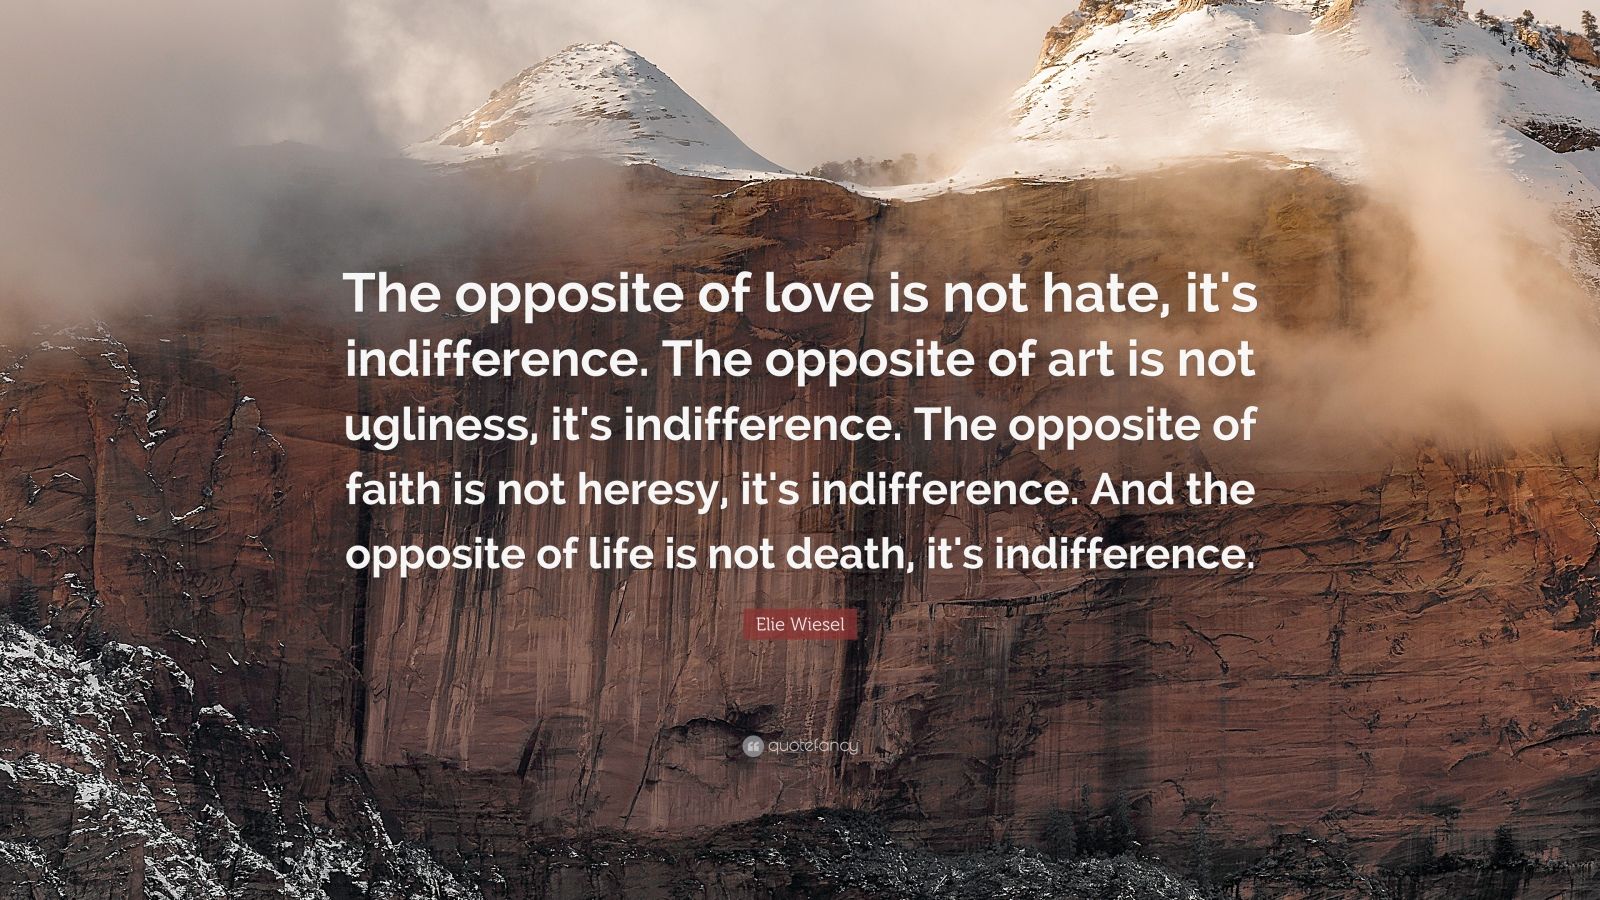 Elie Wiesel Quote: “The opposite of love is not hate, it's indifference